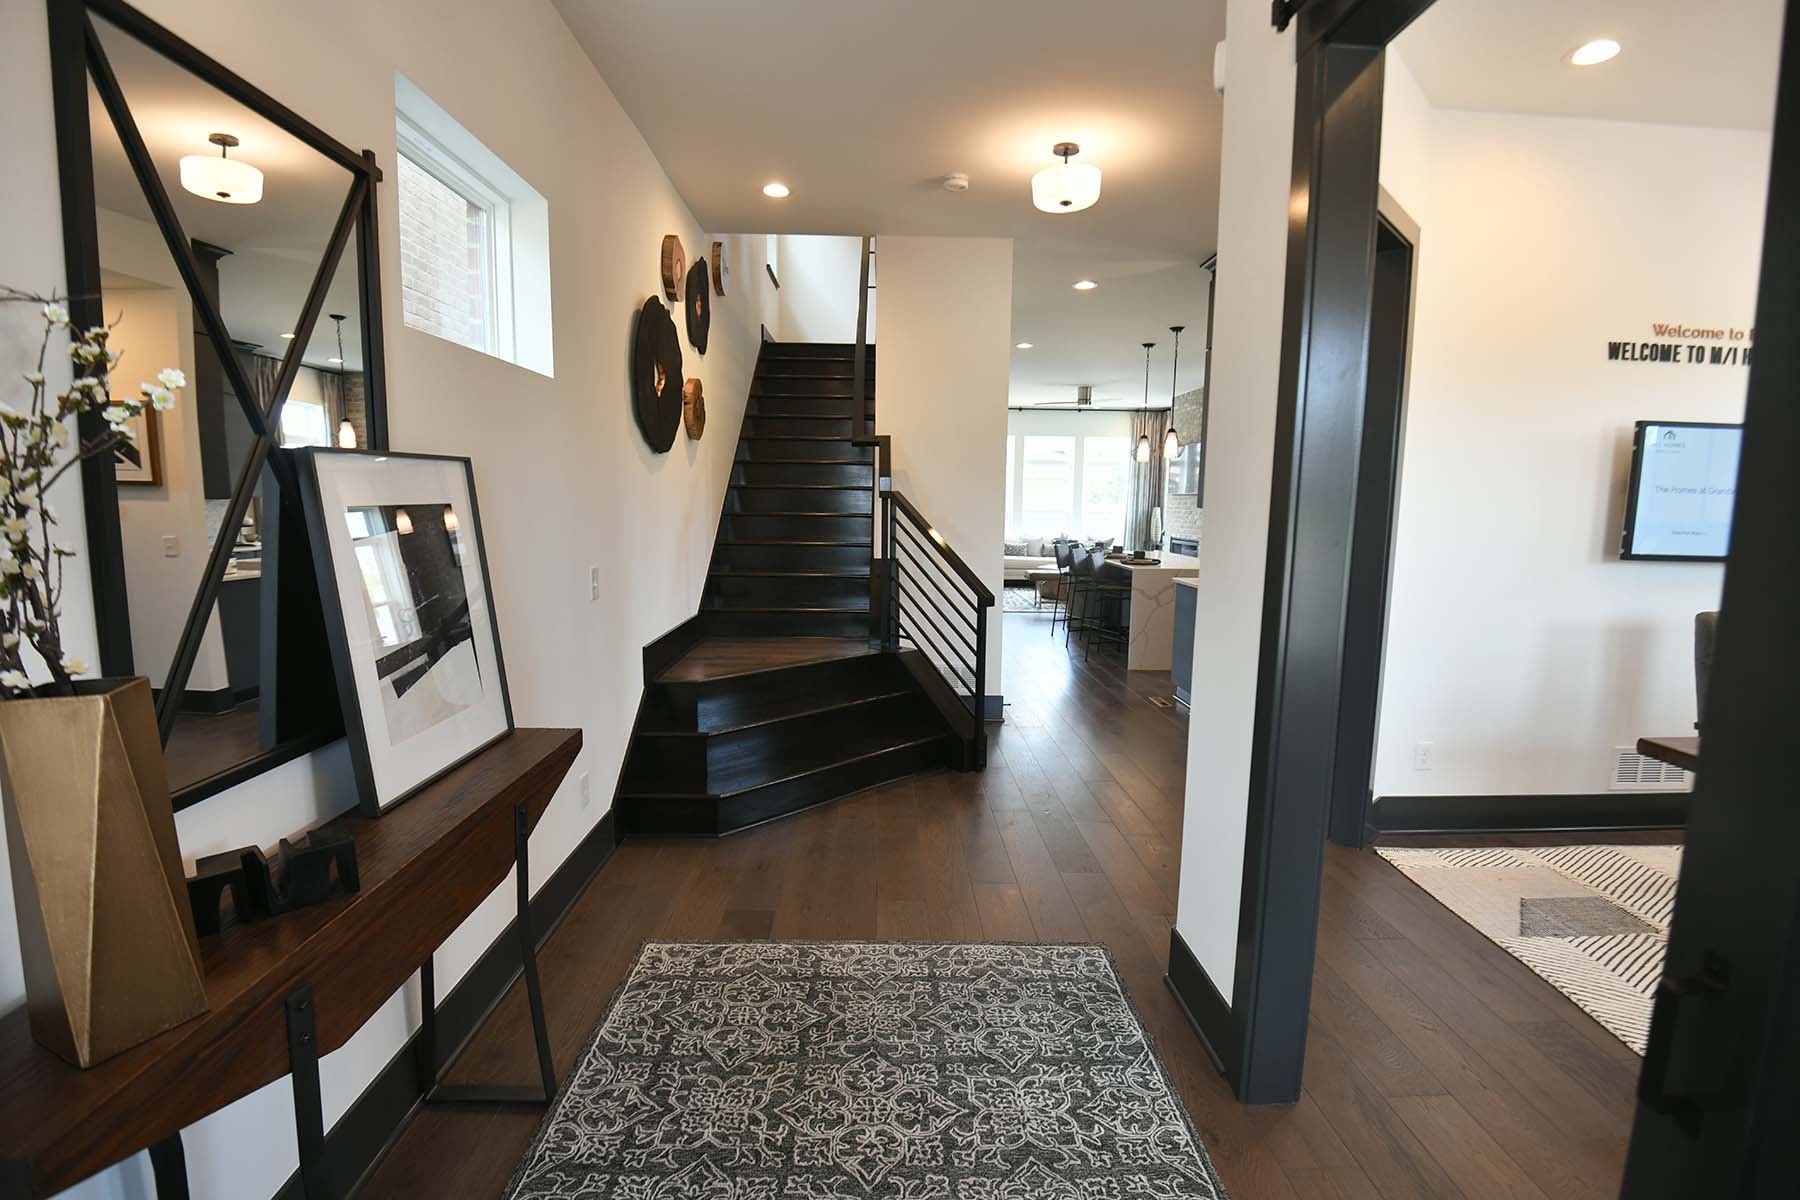 [Set of wood stairs leading up to the second floor of a modern home]